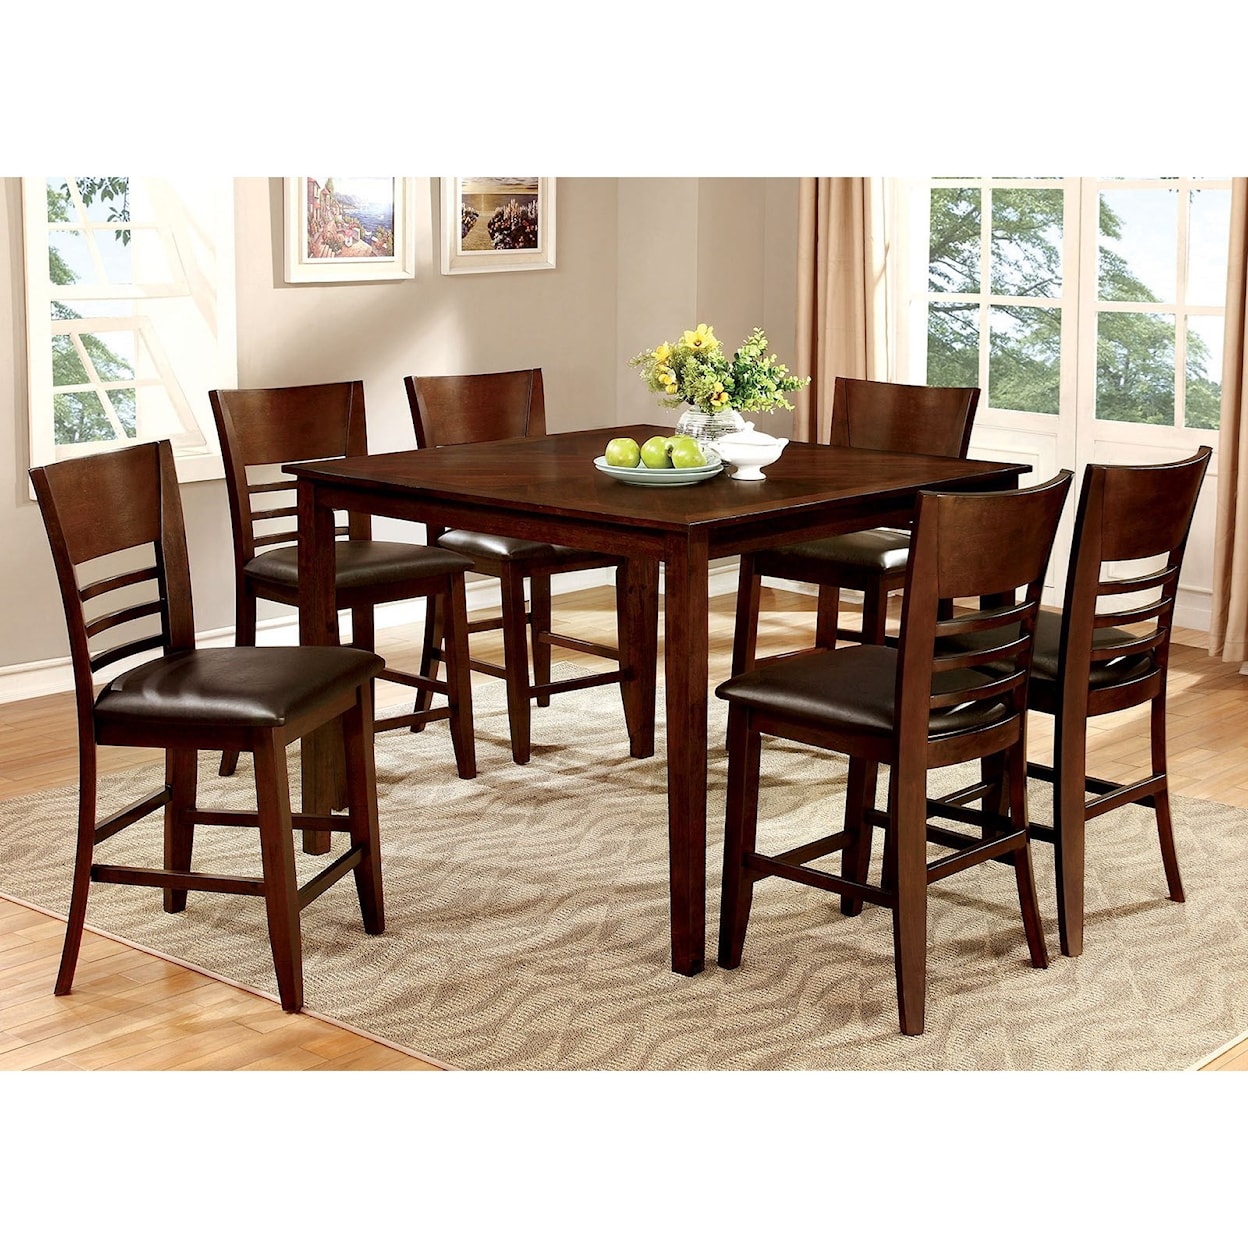 Furniture of America - FOA Hillsview Counter Height Dining